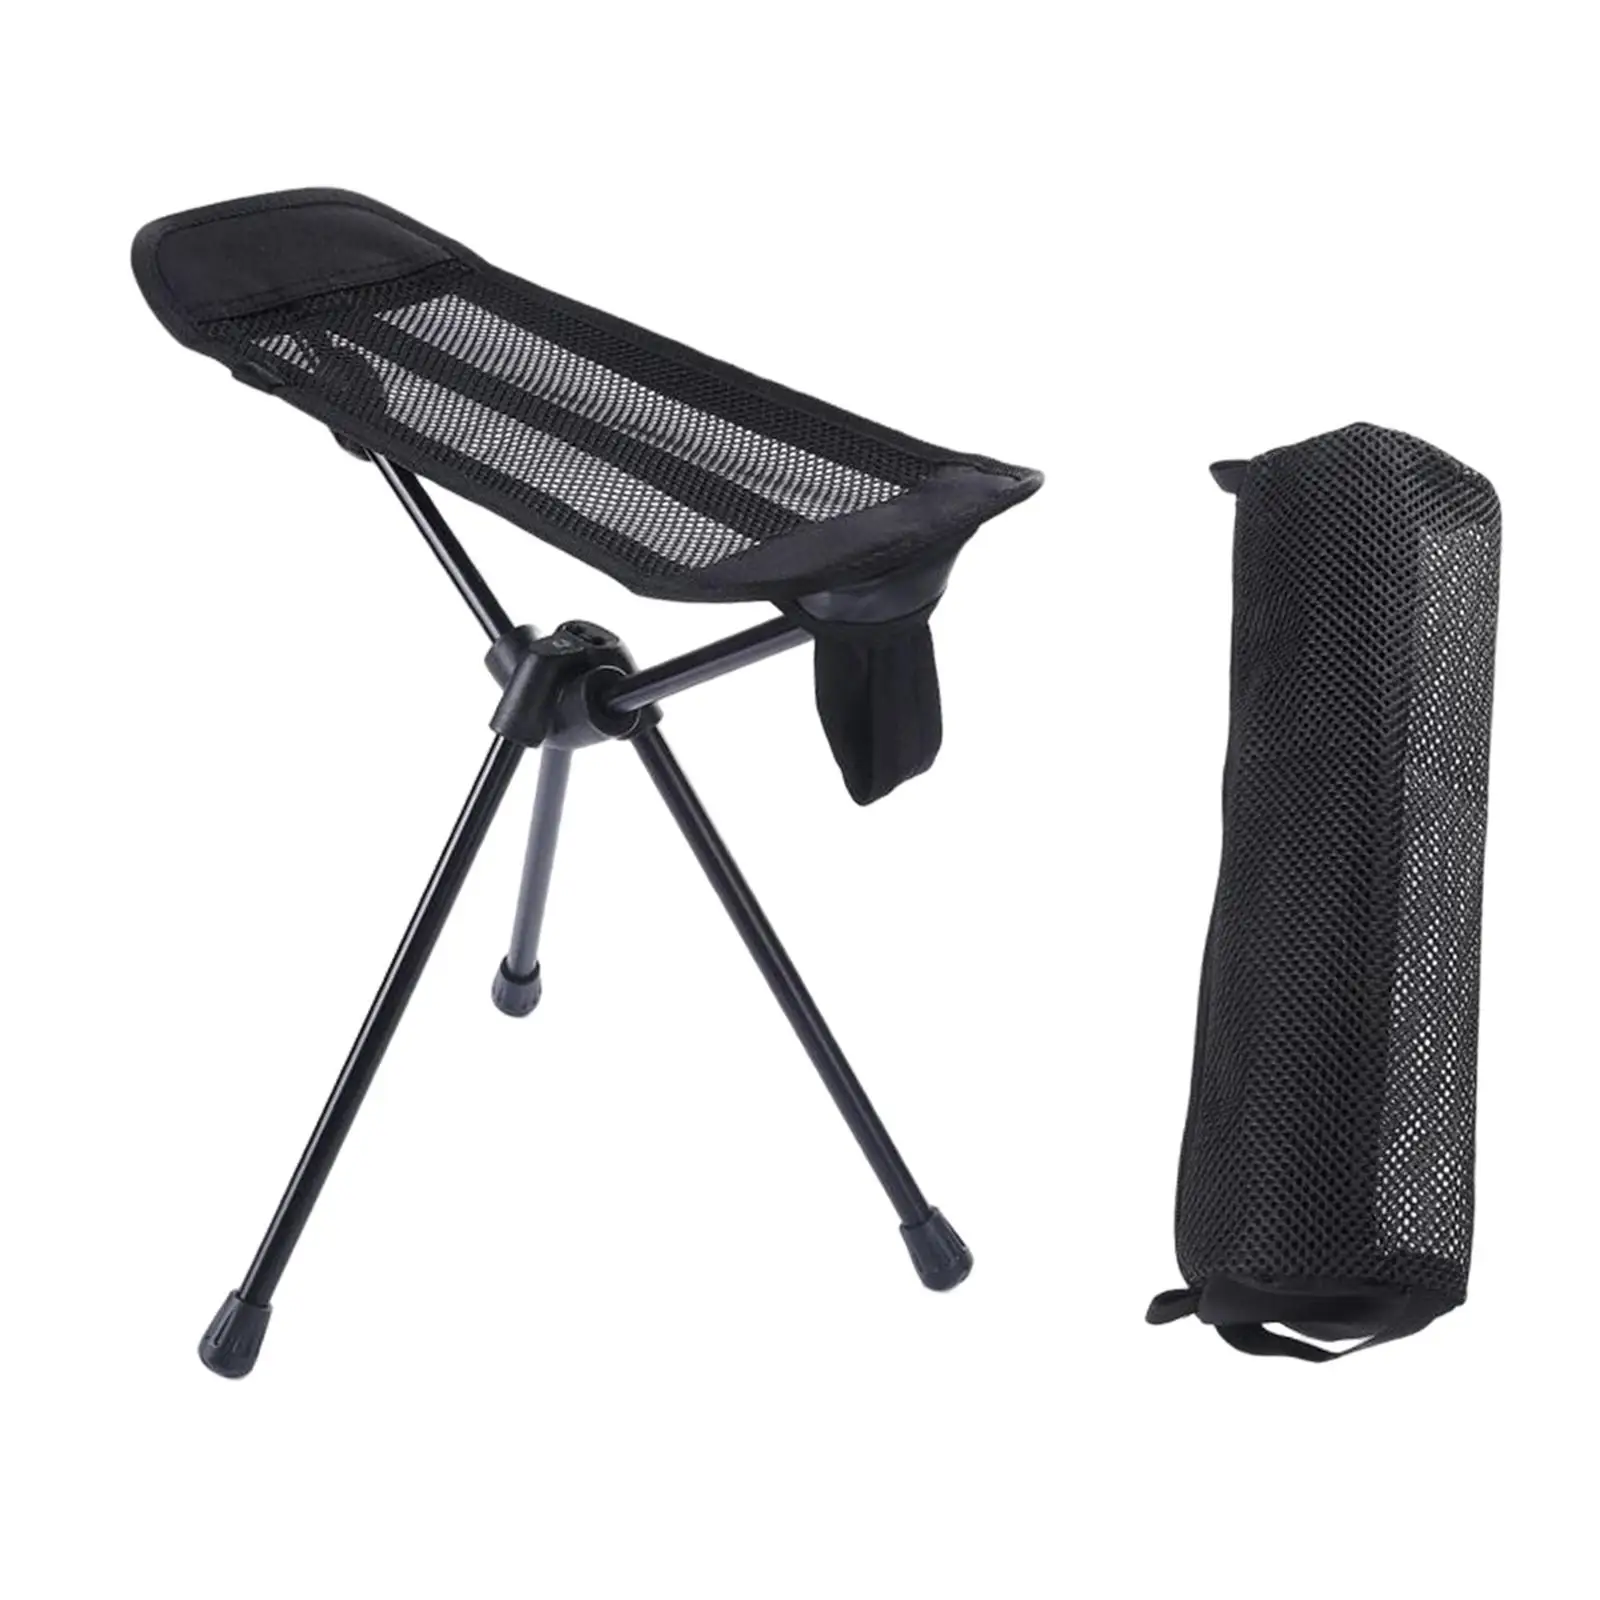 Camping Folding Chair Footrest, Portable Retractable Foot Stool, Outdoor Fishing